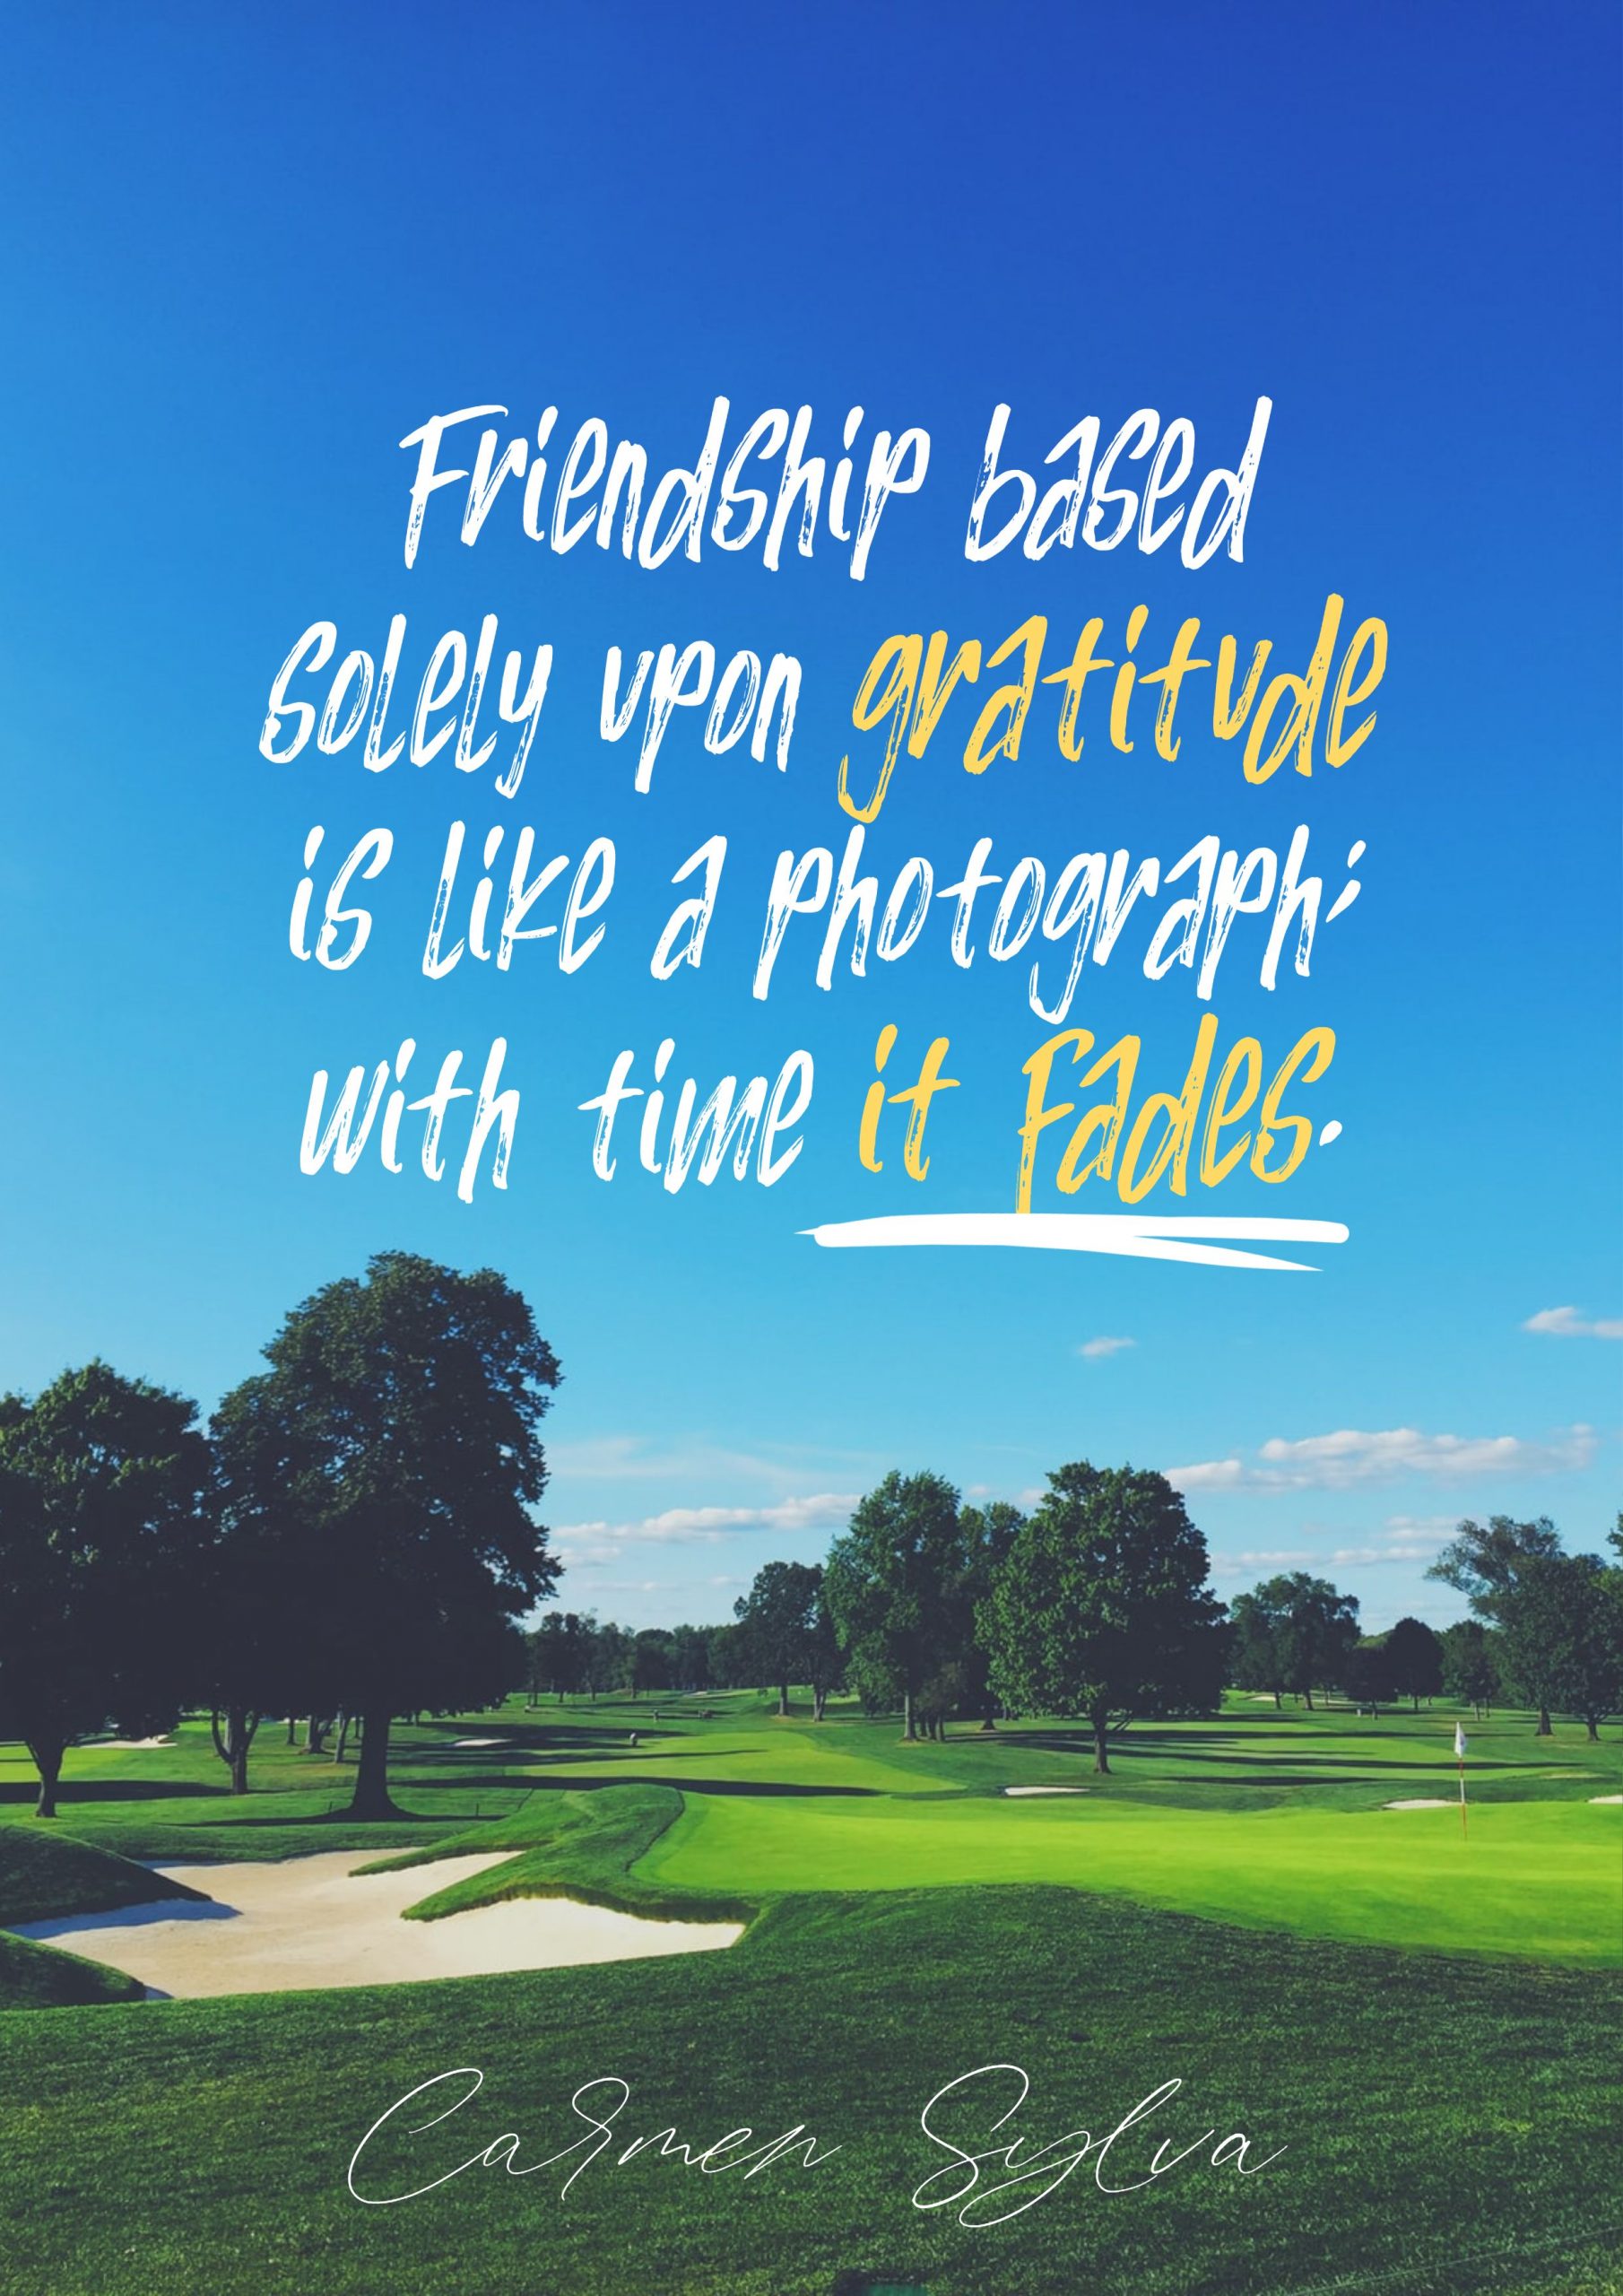 Carmen Sylva’s quote about Friendship. Friendship based solely upon gratitude…